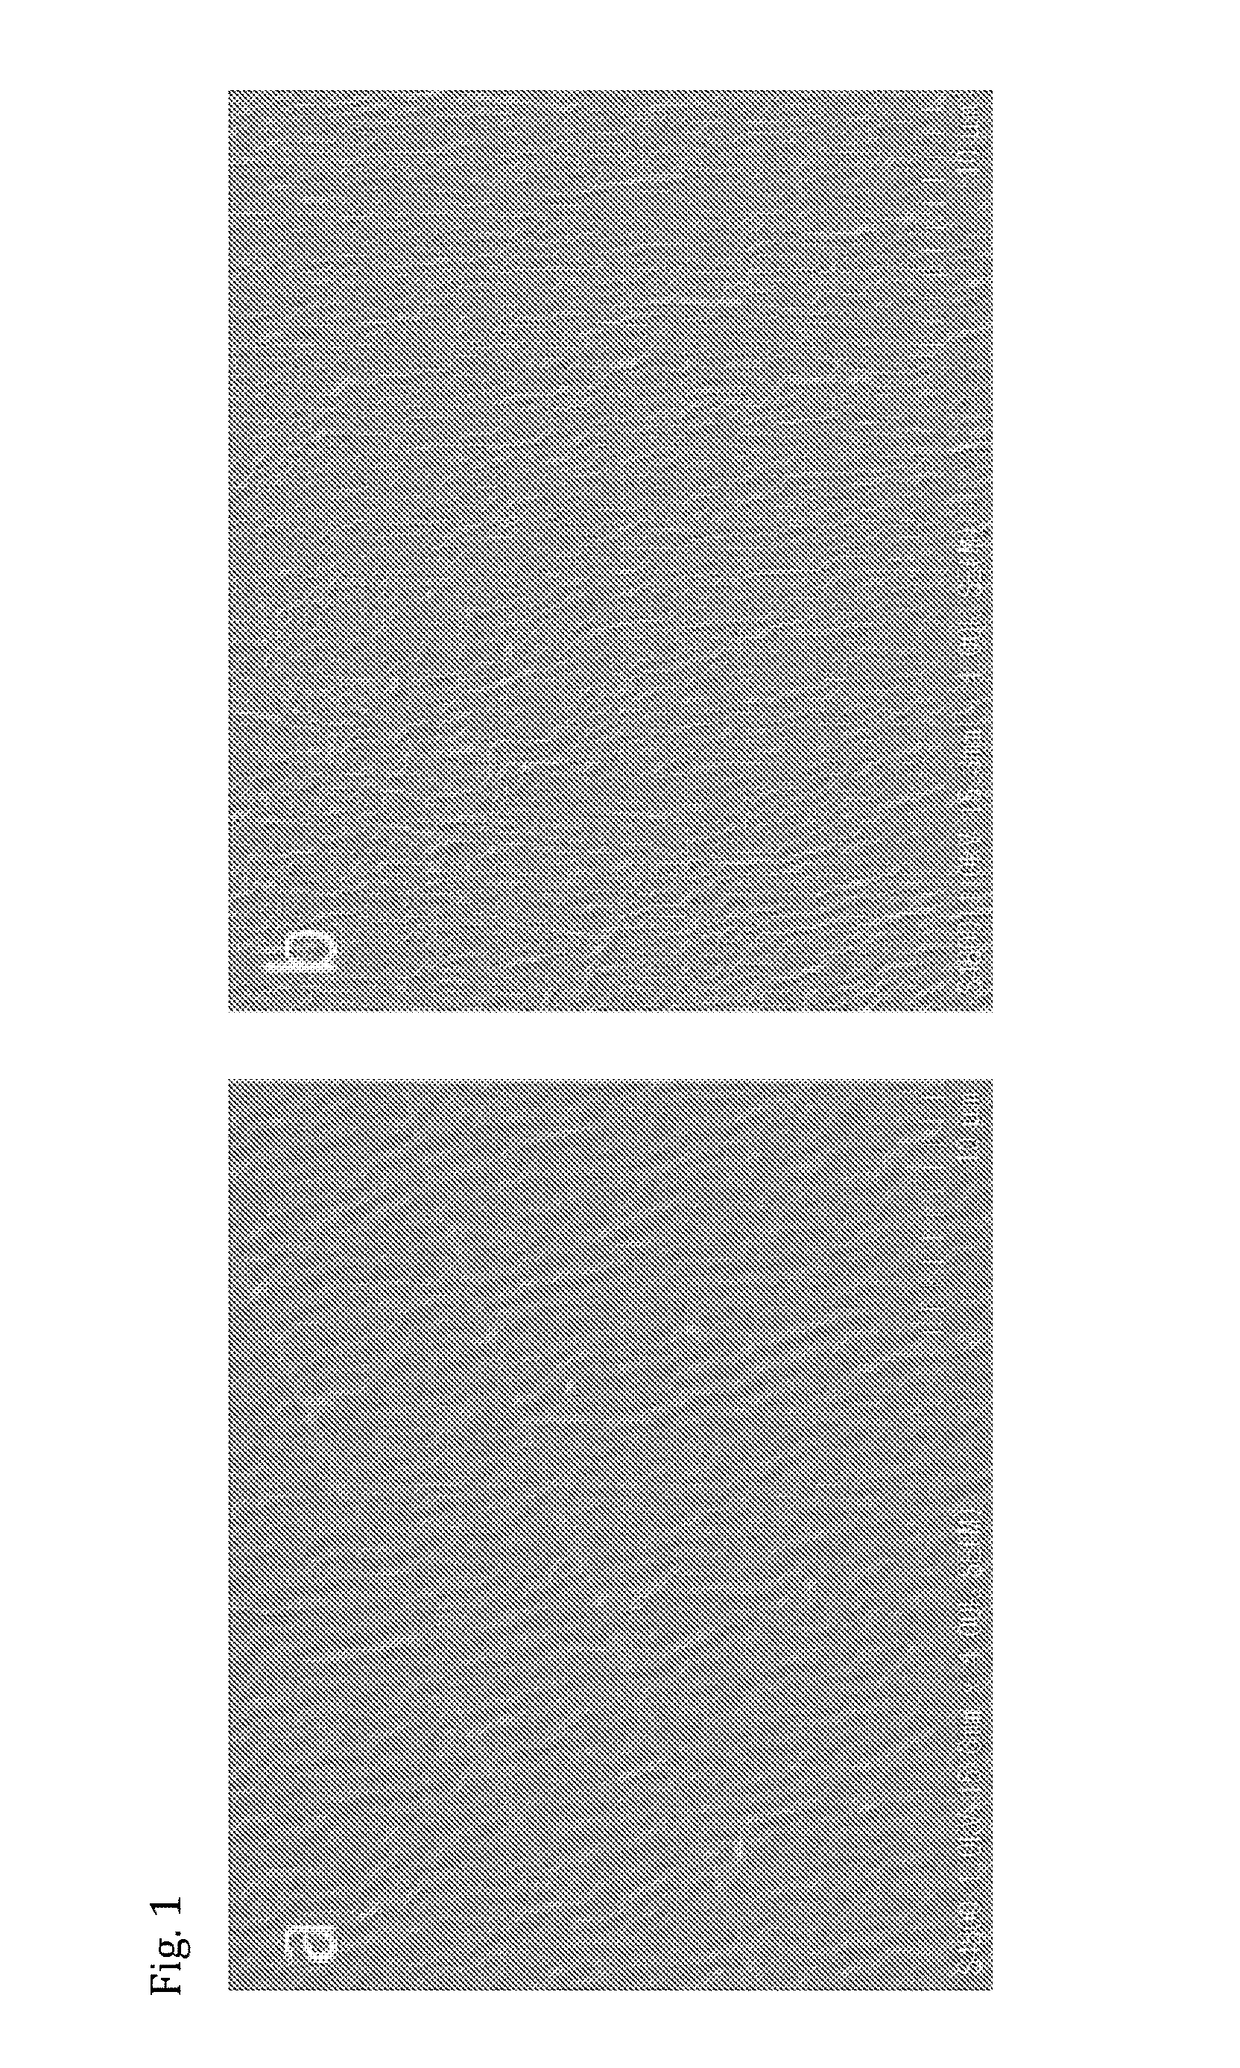 Nitric oxide-releasing wound treatment film and preparation method therefor